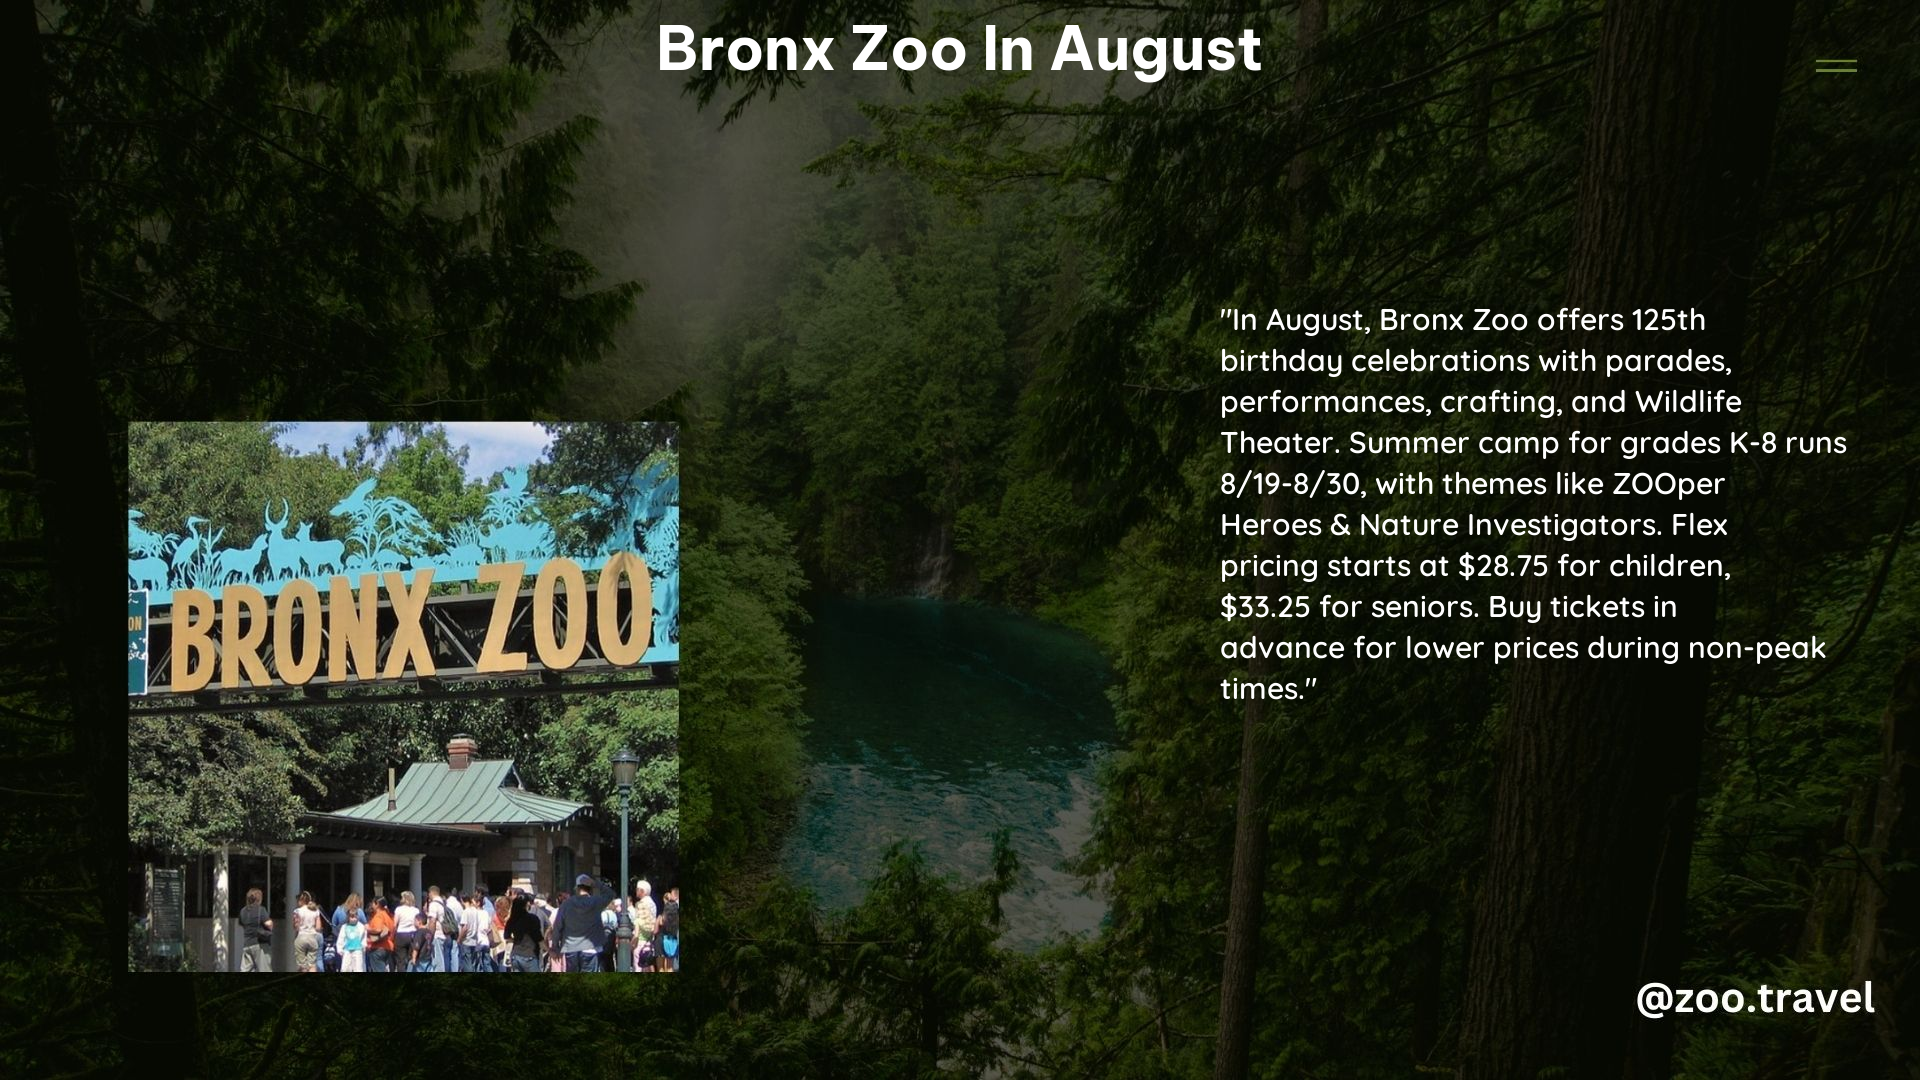 Bronx Zoo in August